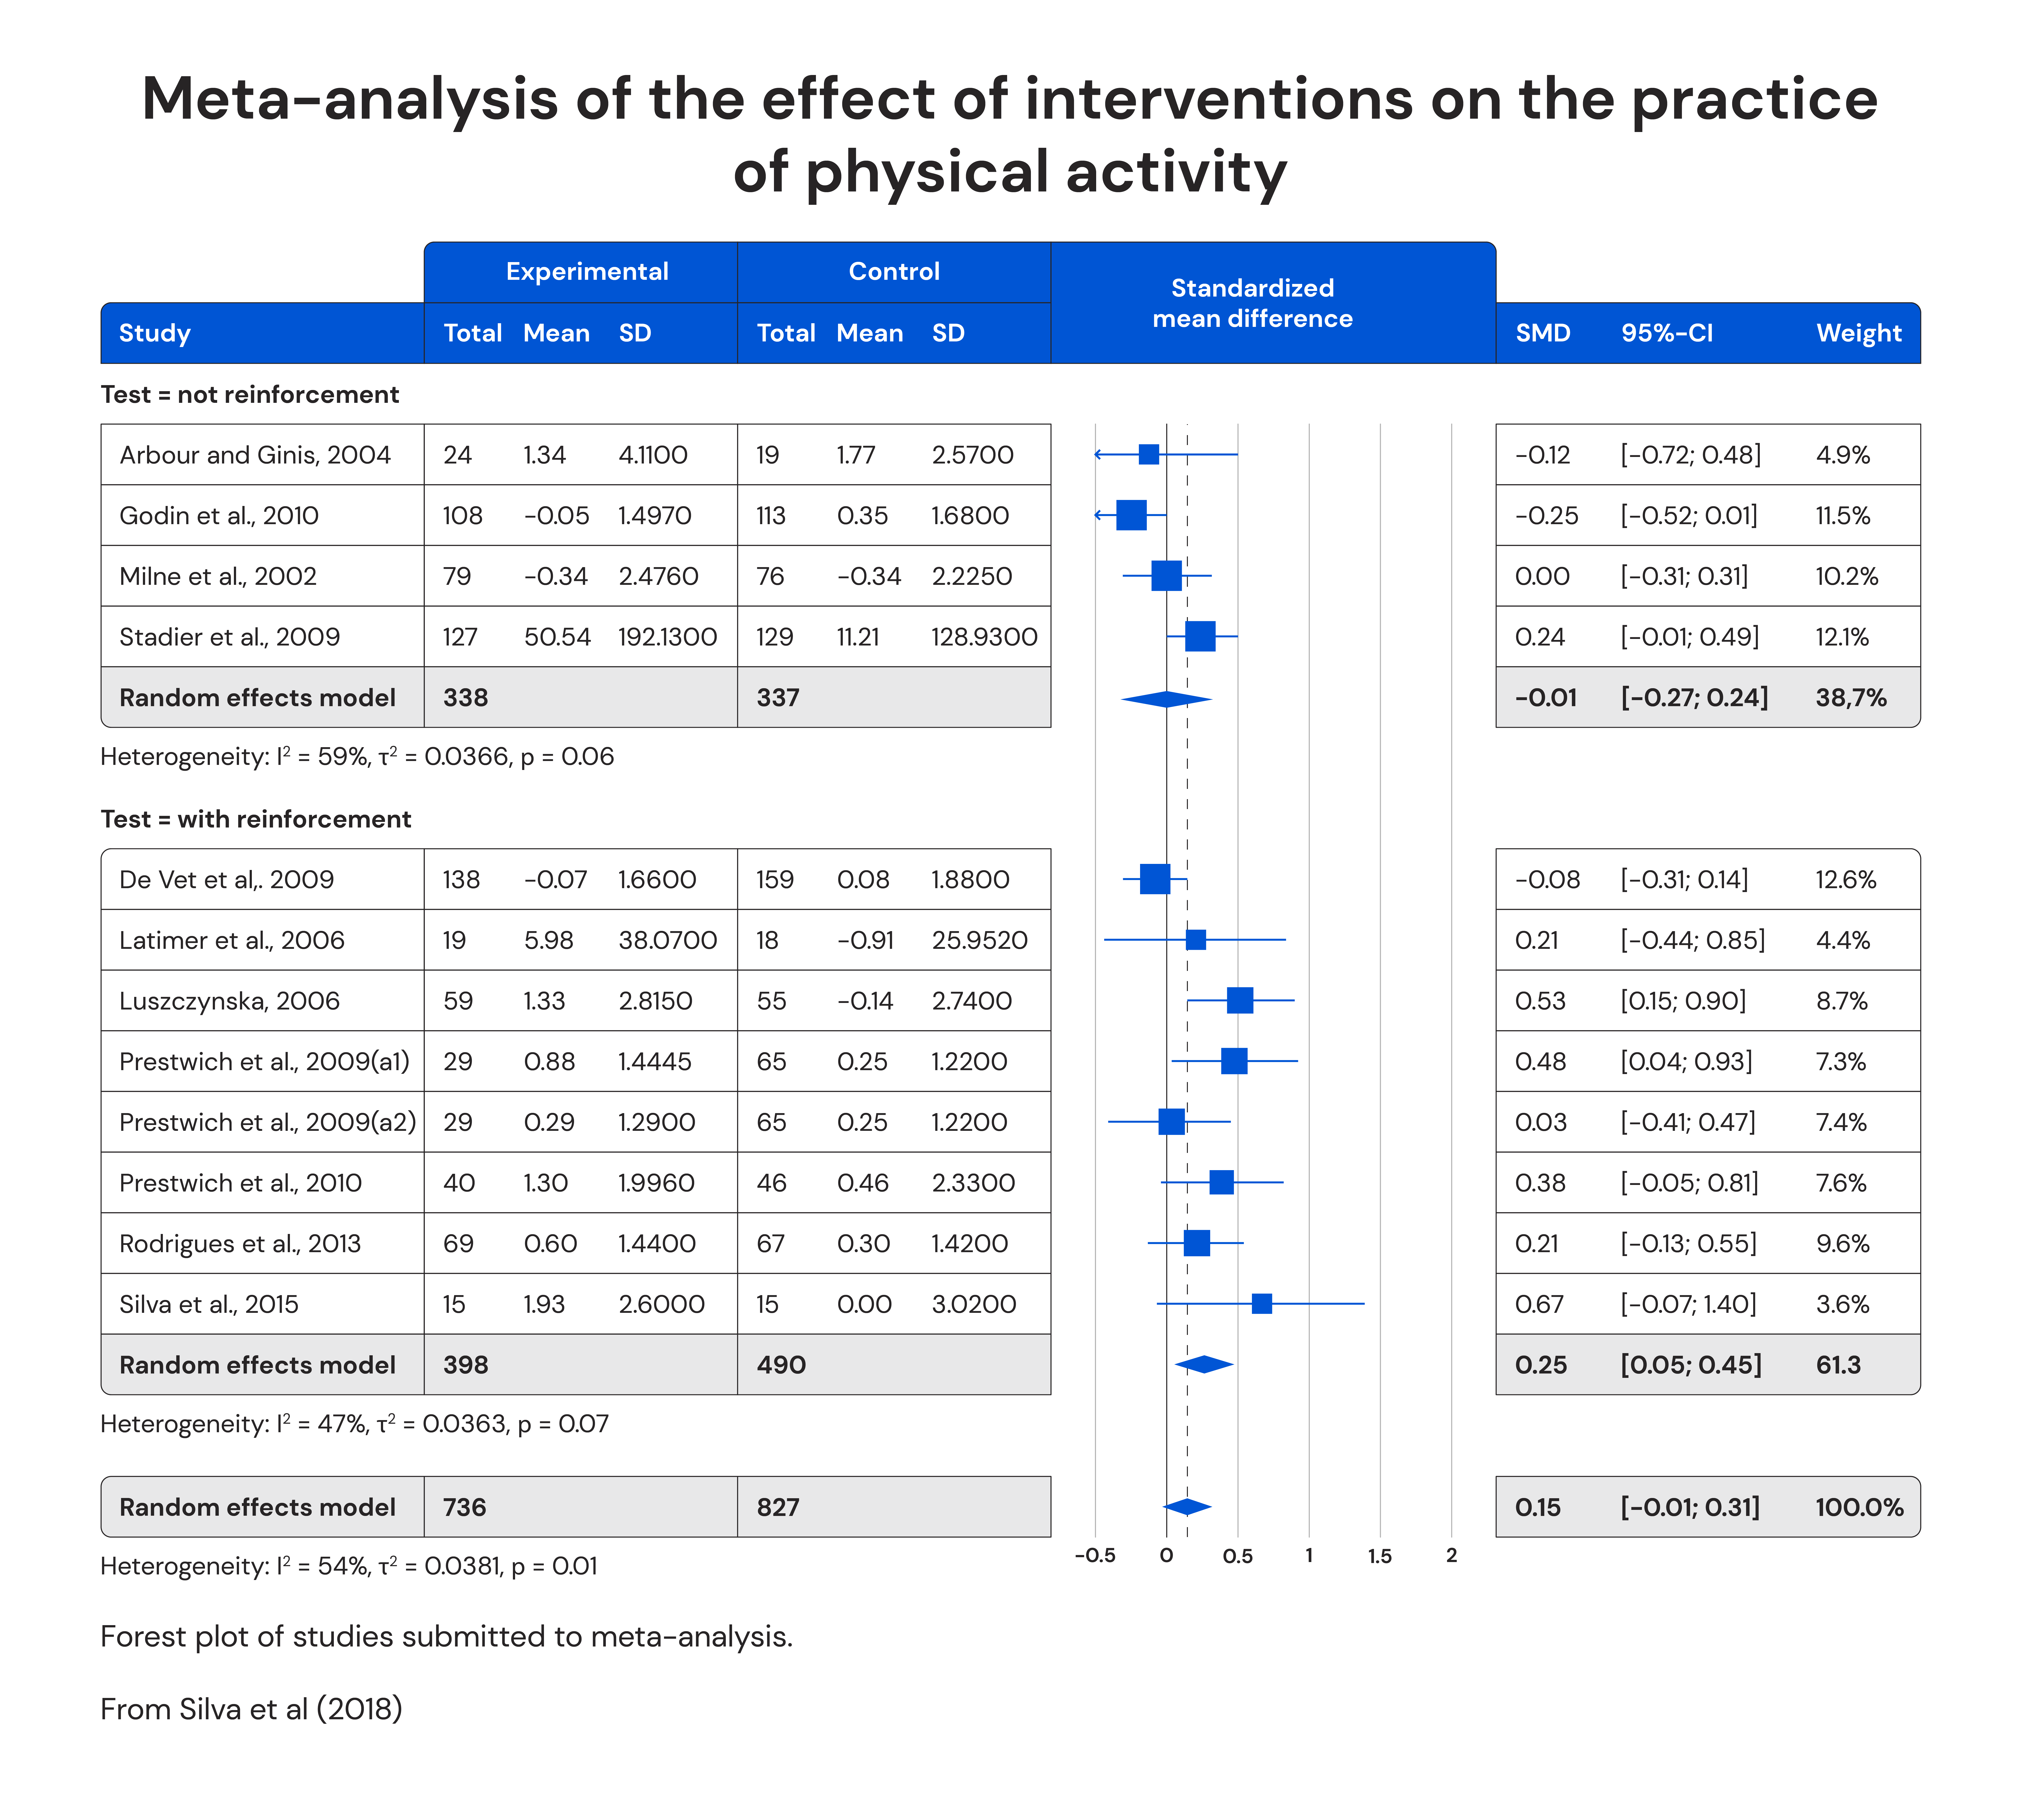 Meta-analysis of the effect of interventions on the practice of physical activity